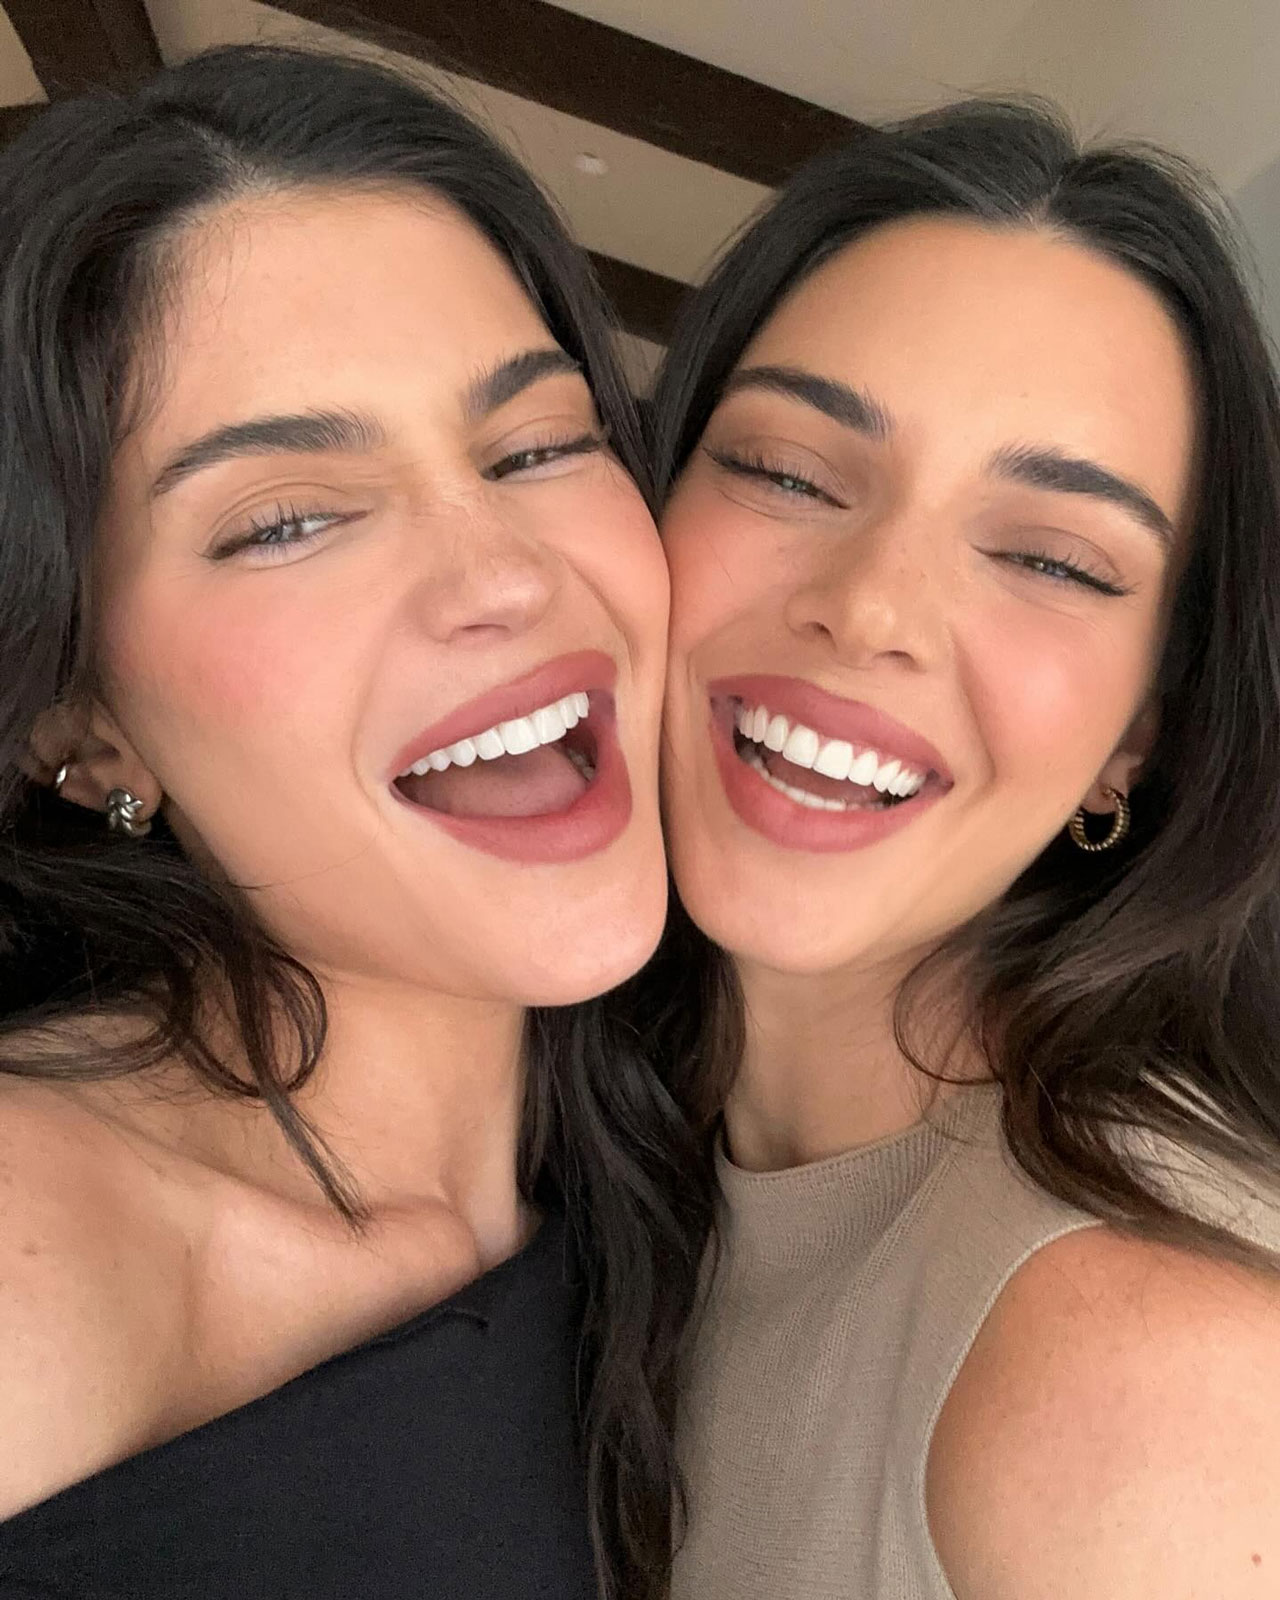 Despite Being Called Kendall Jenner's Lookalike, Female